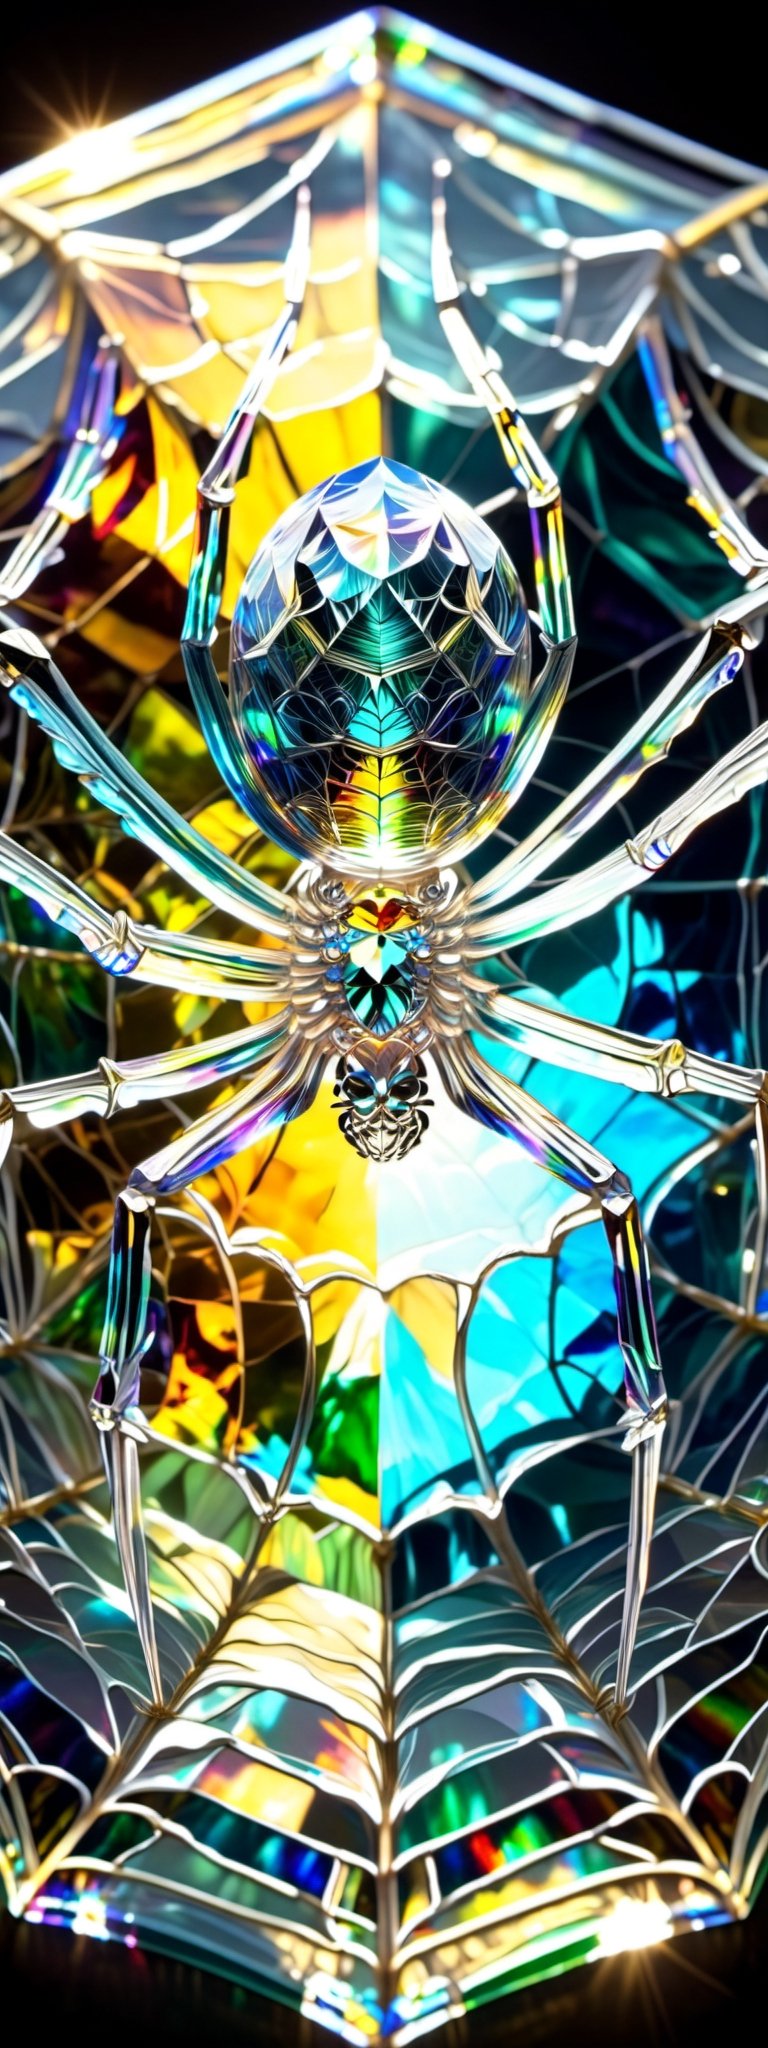 A beautiful crystal spider, hanging from its velvet thread, with colors of green, yellow and blue hues gleaming through from the sun rays.,glass art,more detail XL,BugCraft,DonMSp3ctr4lXL